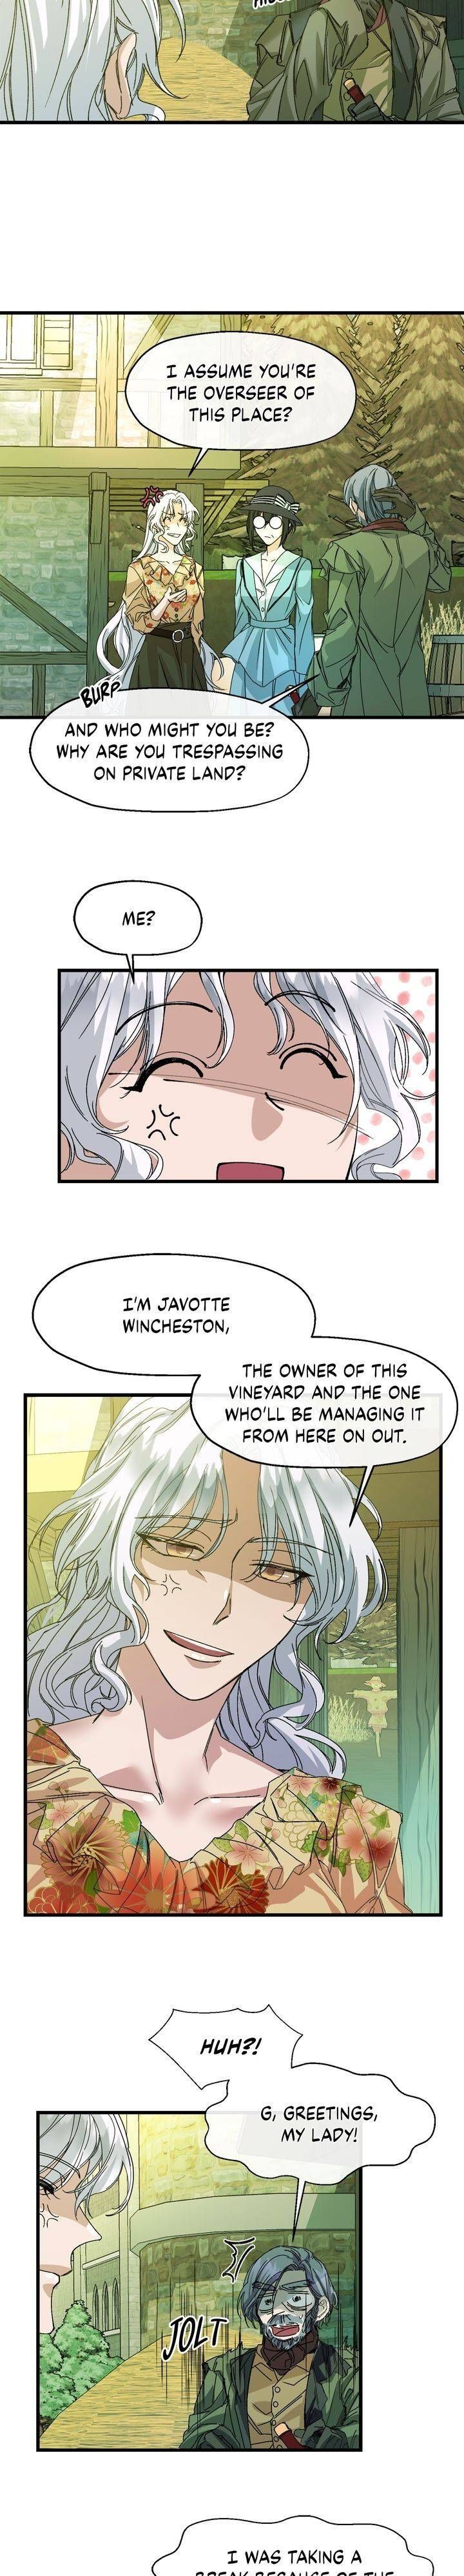 Don't Call Javotte an Evil Stepsister Chapter 11 page 2